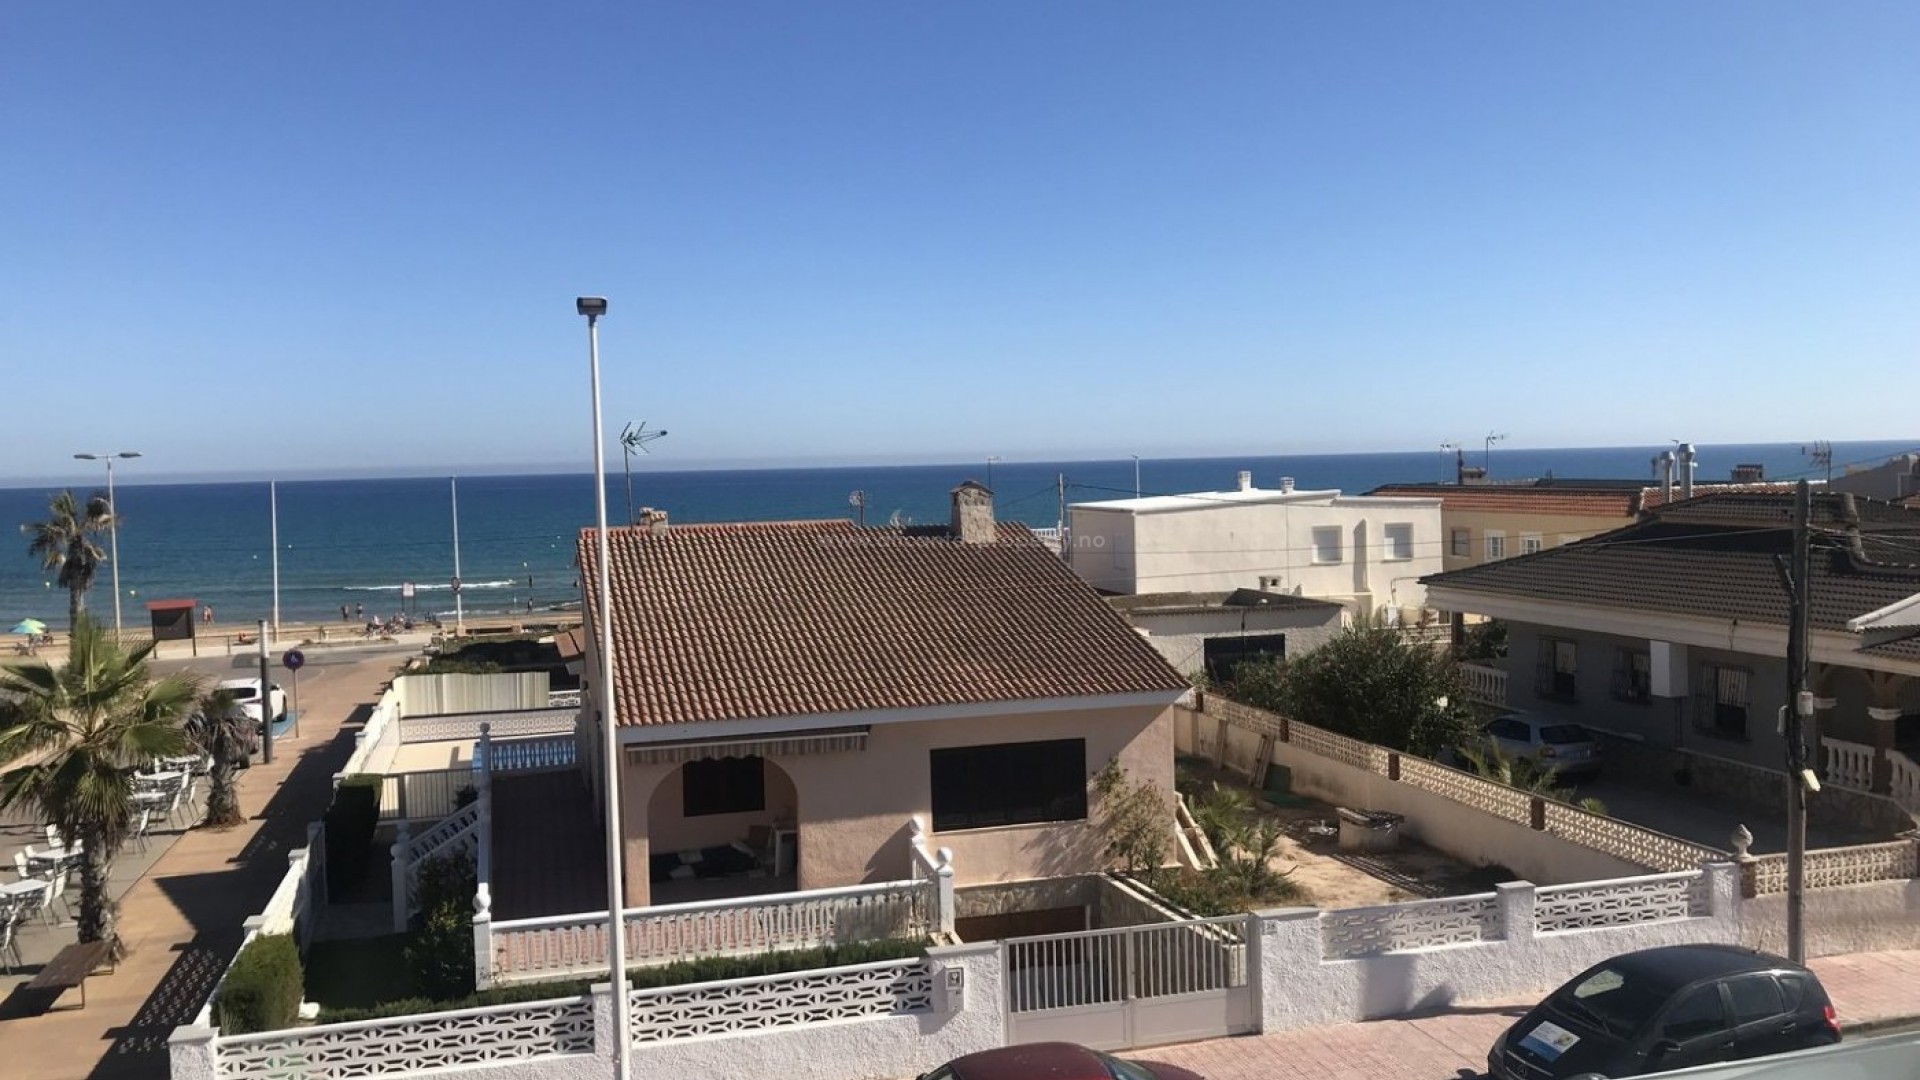 House/villa in La Mata 60m from the beach and w/sea view, 4 double bedrooms, 4 bathrooms, 2 living rooms, private parking, terraces and solarium with sea view, near Torrevieja